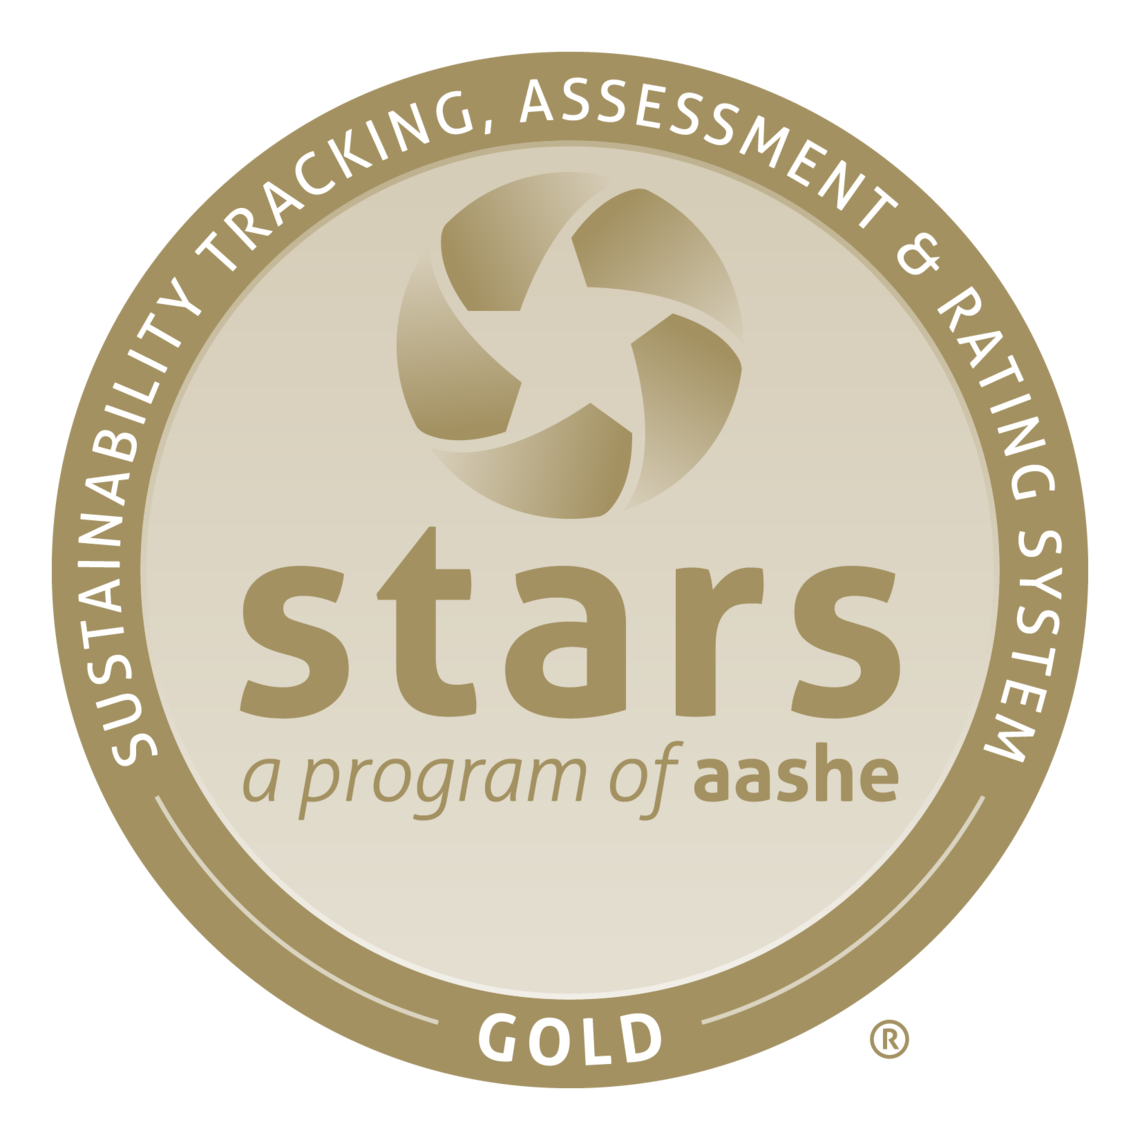 The University of Calgary has received its third STARS Gold rating from the Association for the Advancement of Sustainability in Higher Education. The university improved its overall score and continues to rank number 2 in Canada among our U15 peers (as of March 2019).